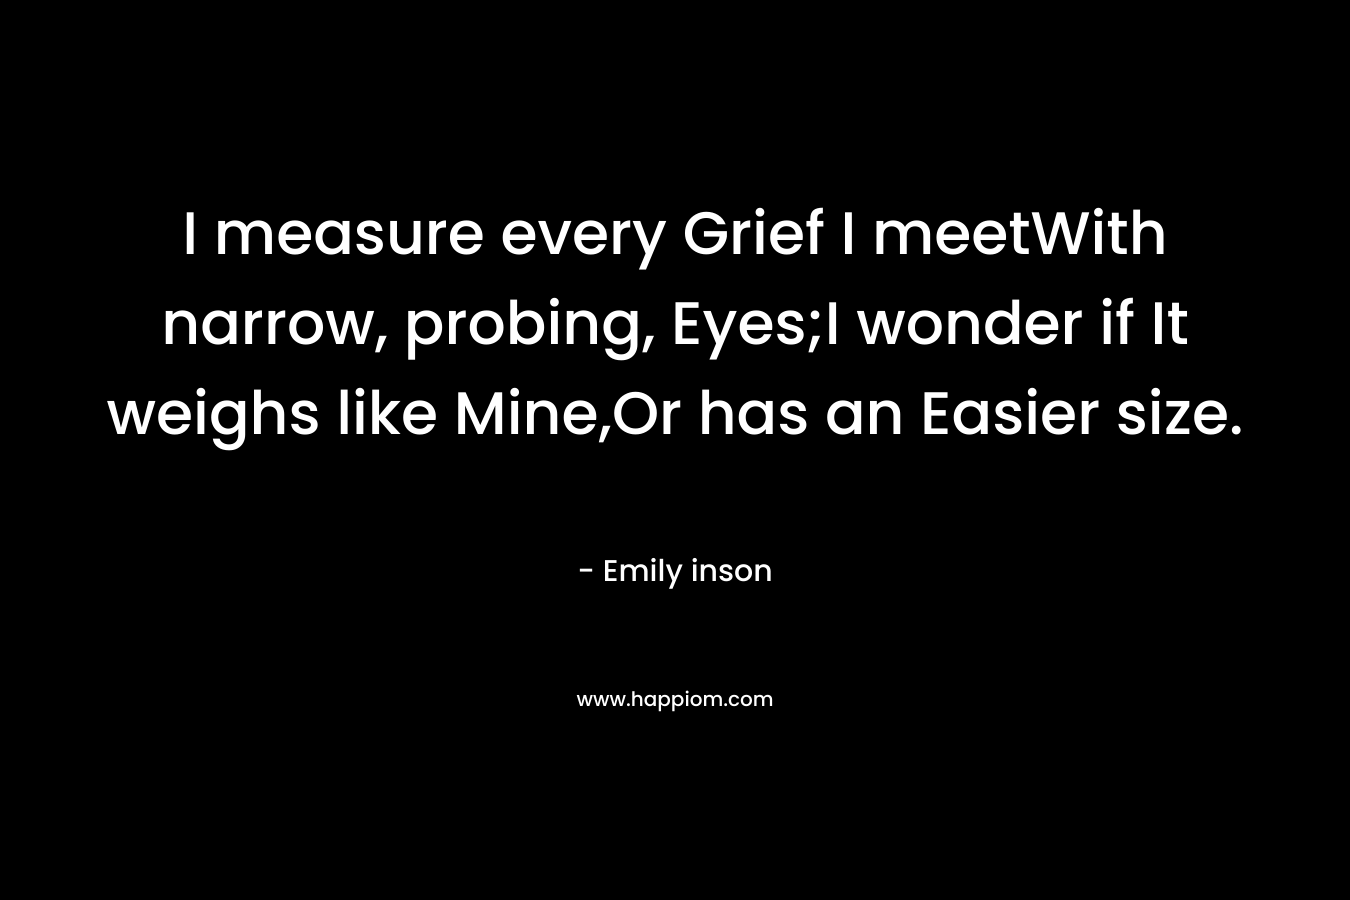 I measure every Grief I meetWith narrow, probing, Eyes;I wonder if It weighs like Mine,Or has an Easier size.